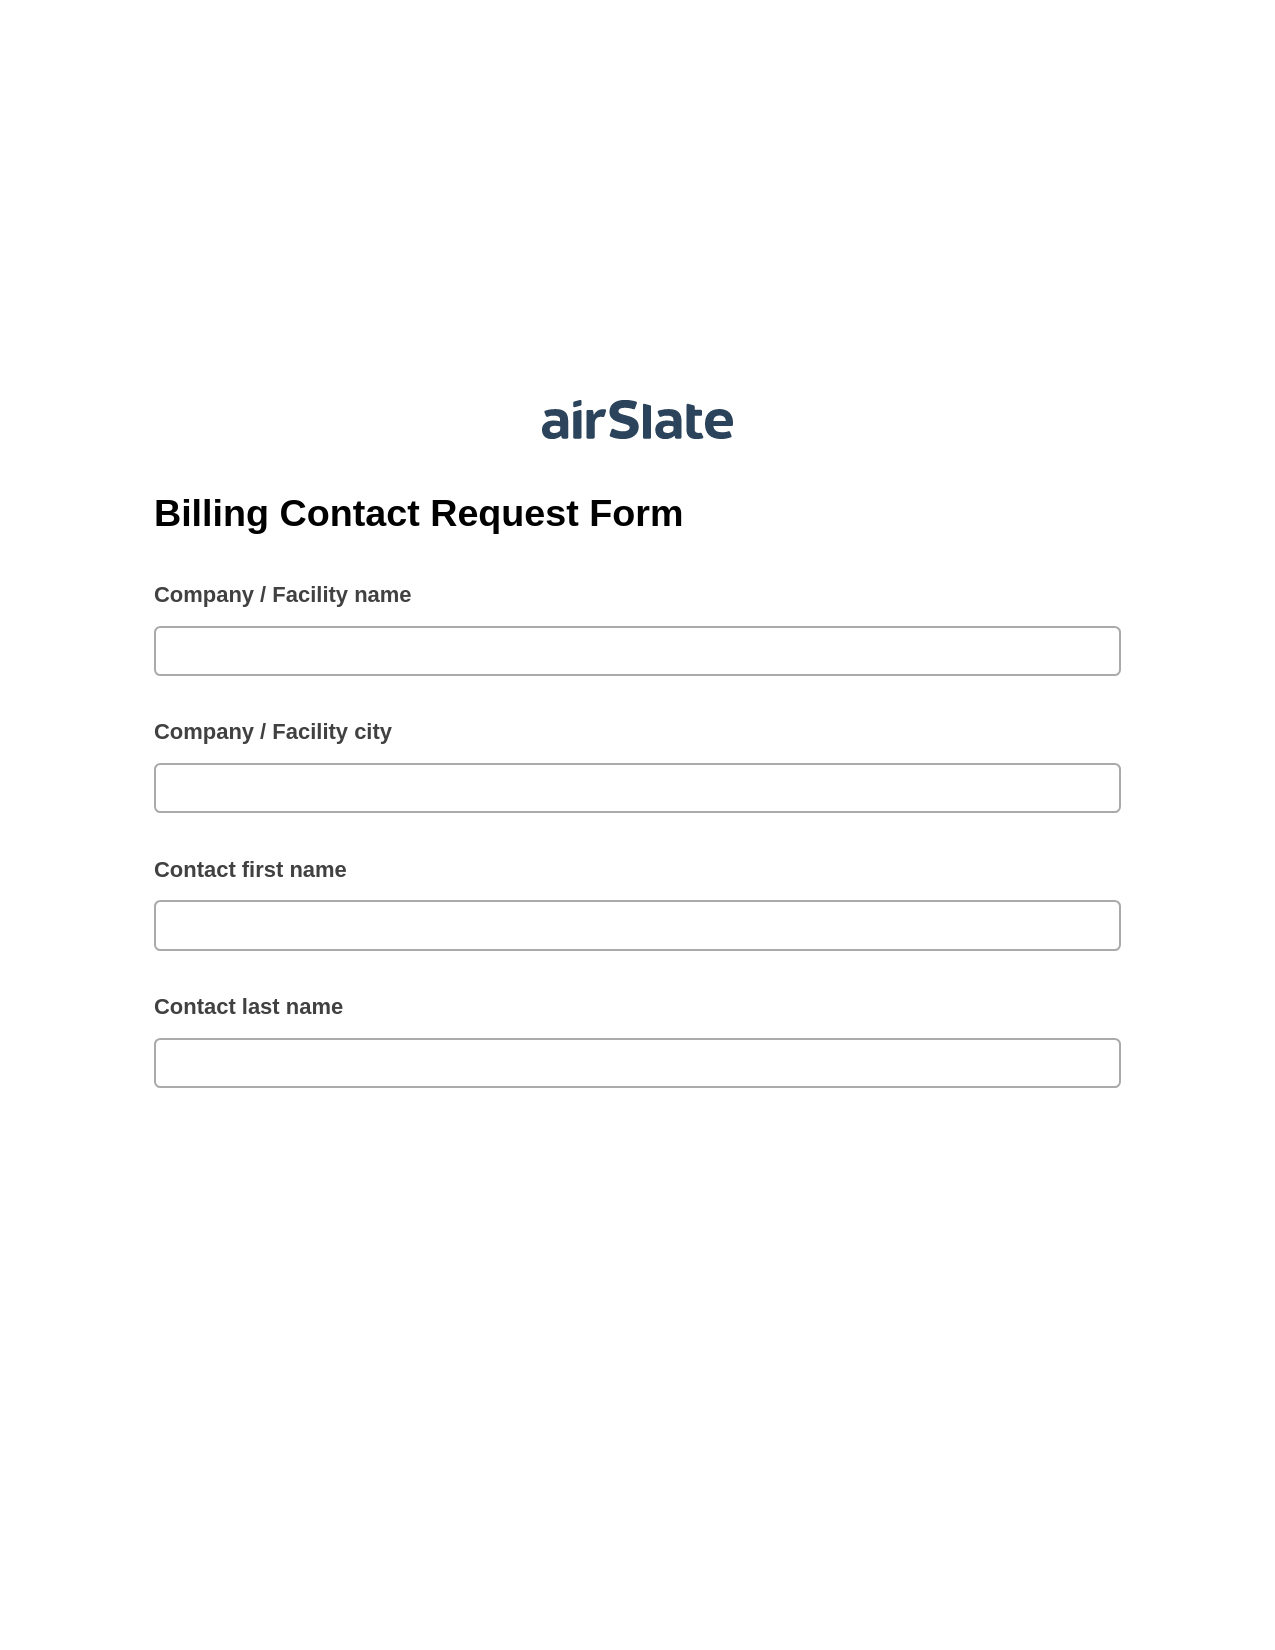 Multirole Billing Contact Request Form Pre-fill from Smartsheet Bot, Document Hide Bot, Export to Excel 365 Bot